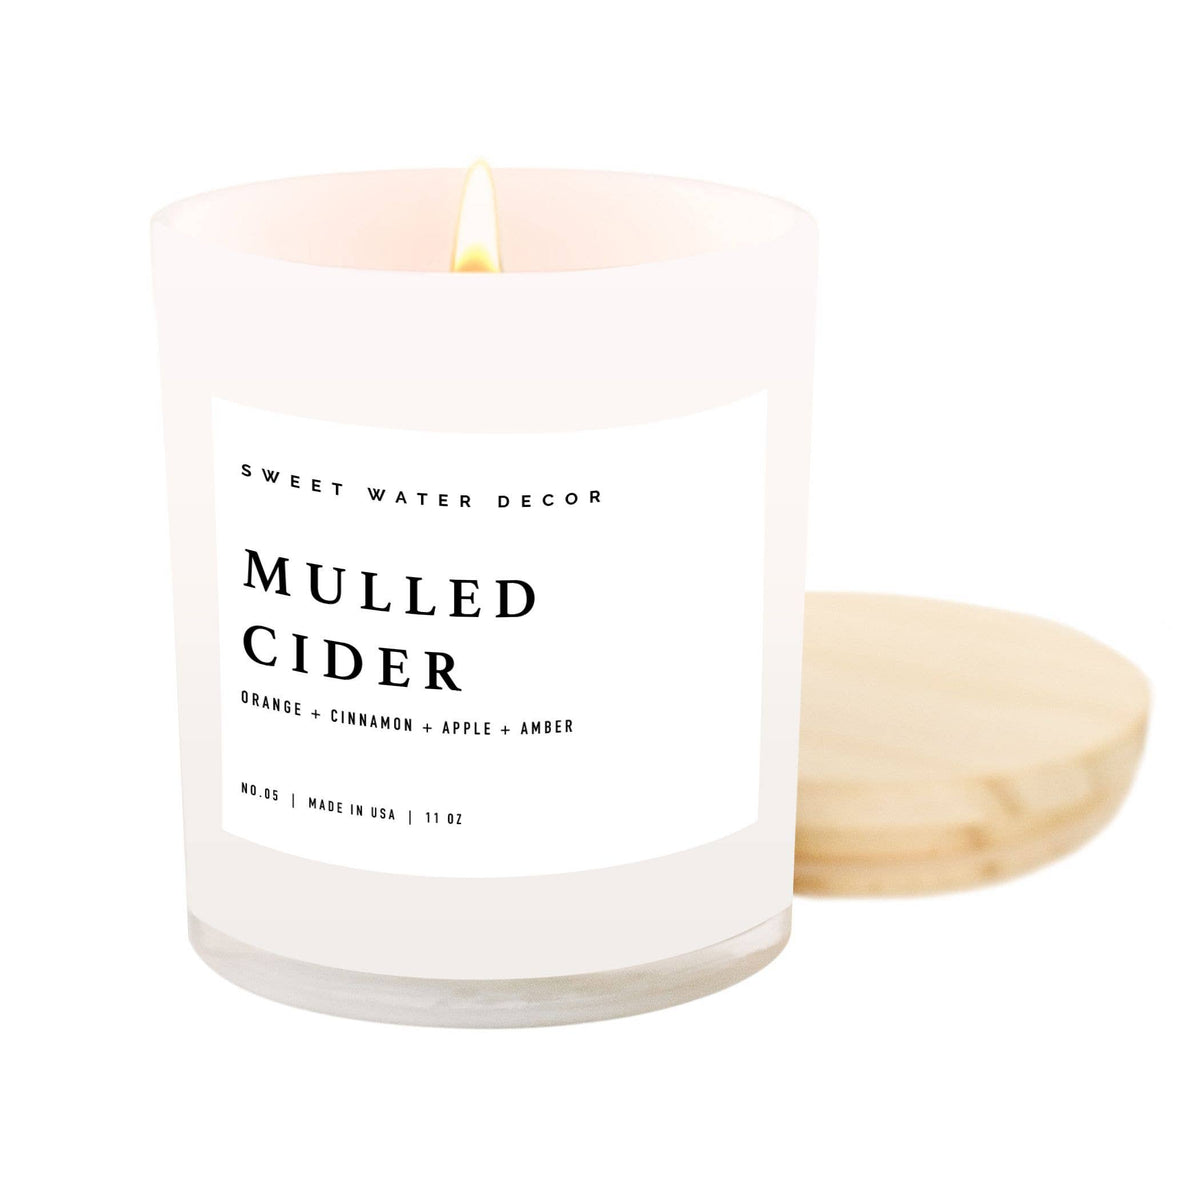 Mulled Cider 11 oz Soy Candle - Fall Home Decor & Gifts